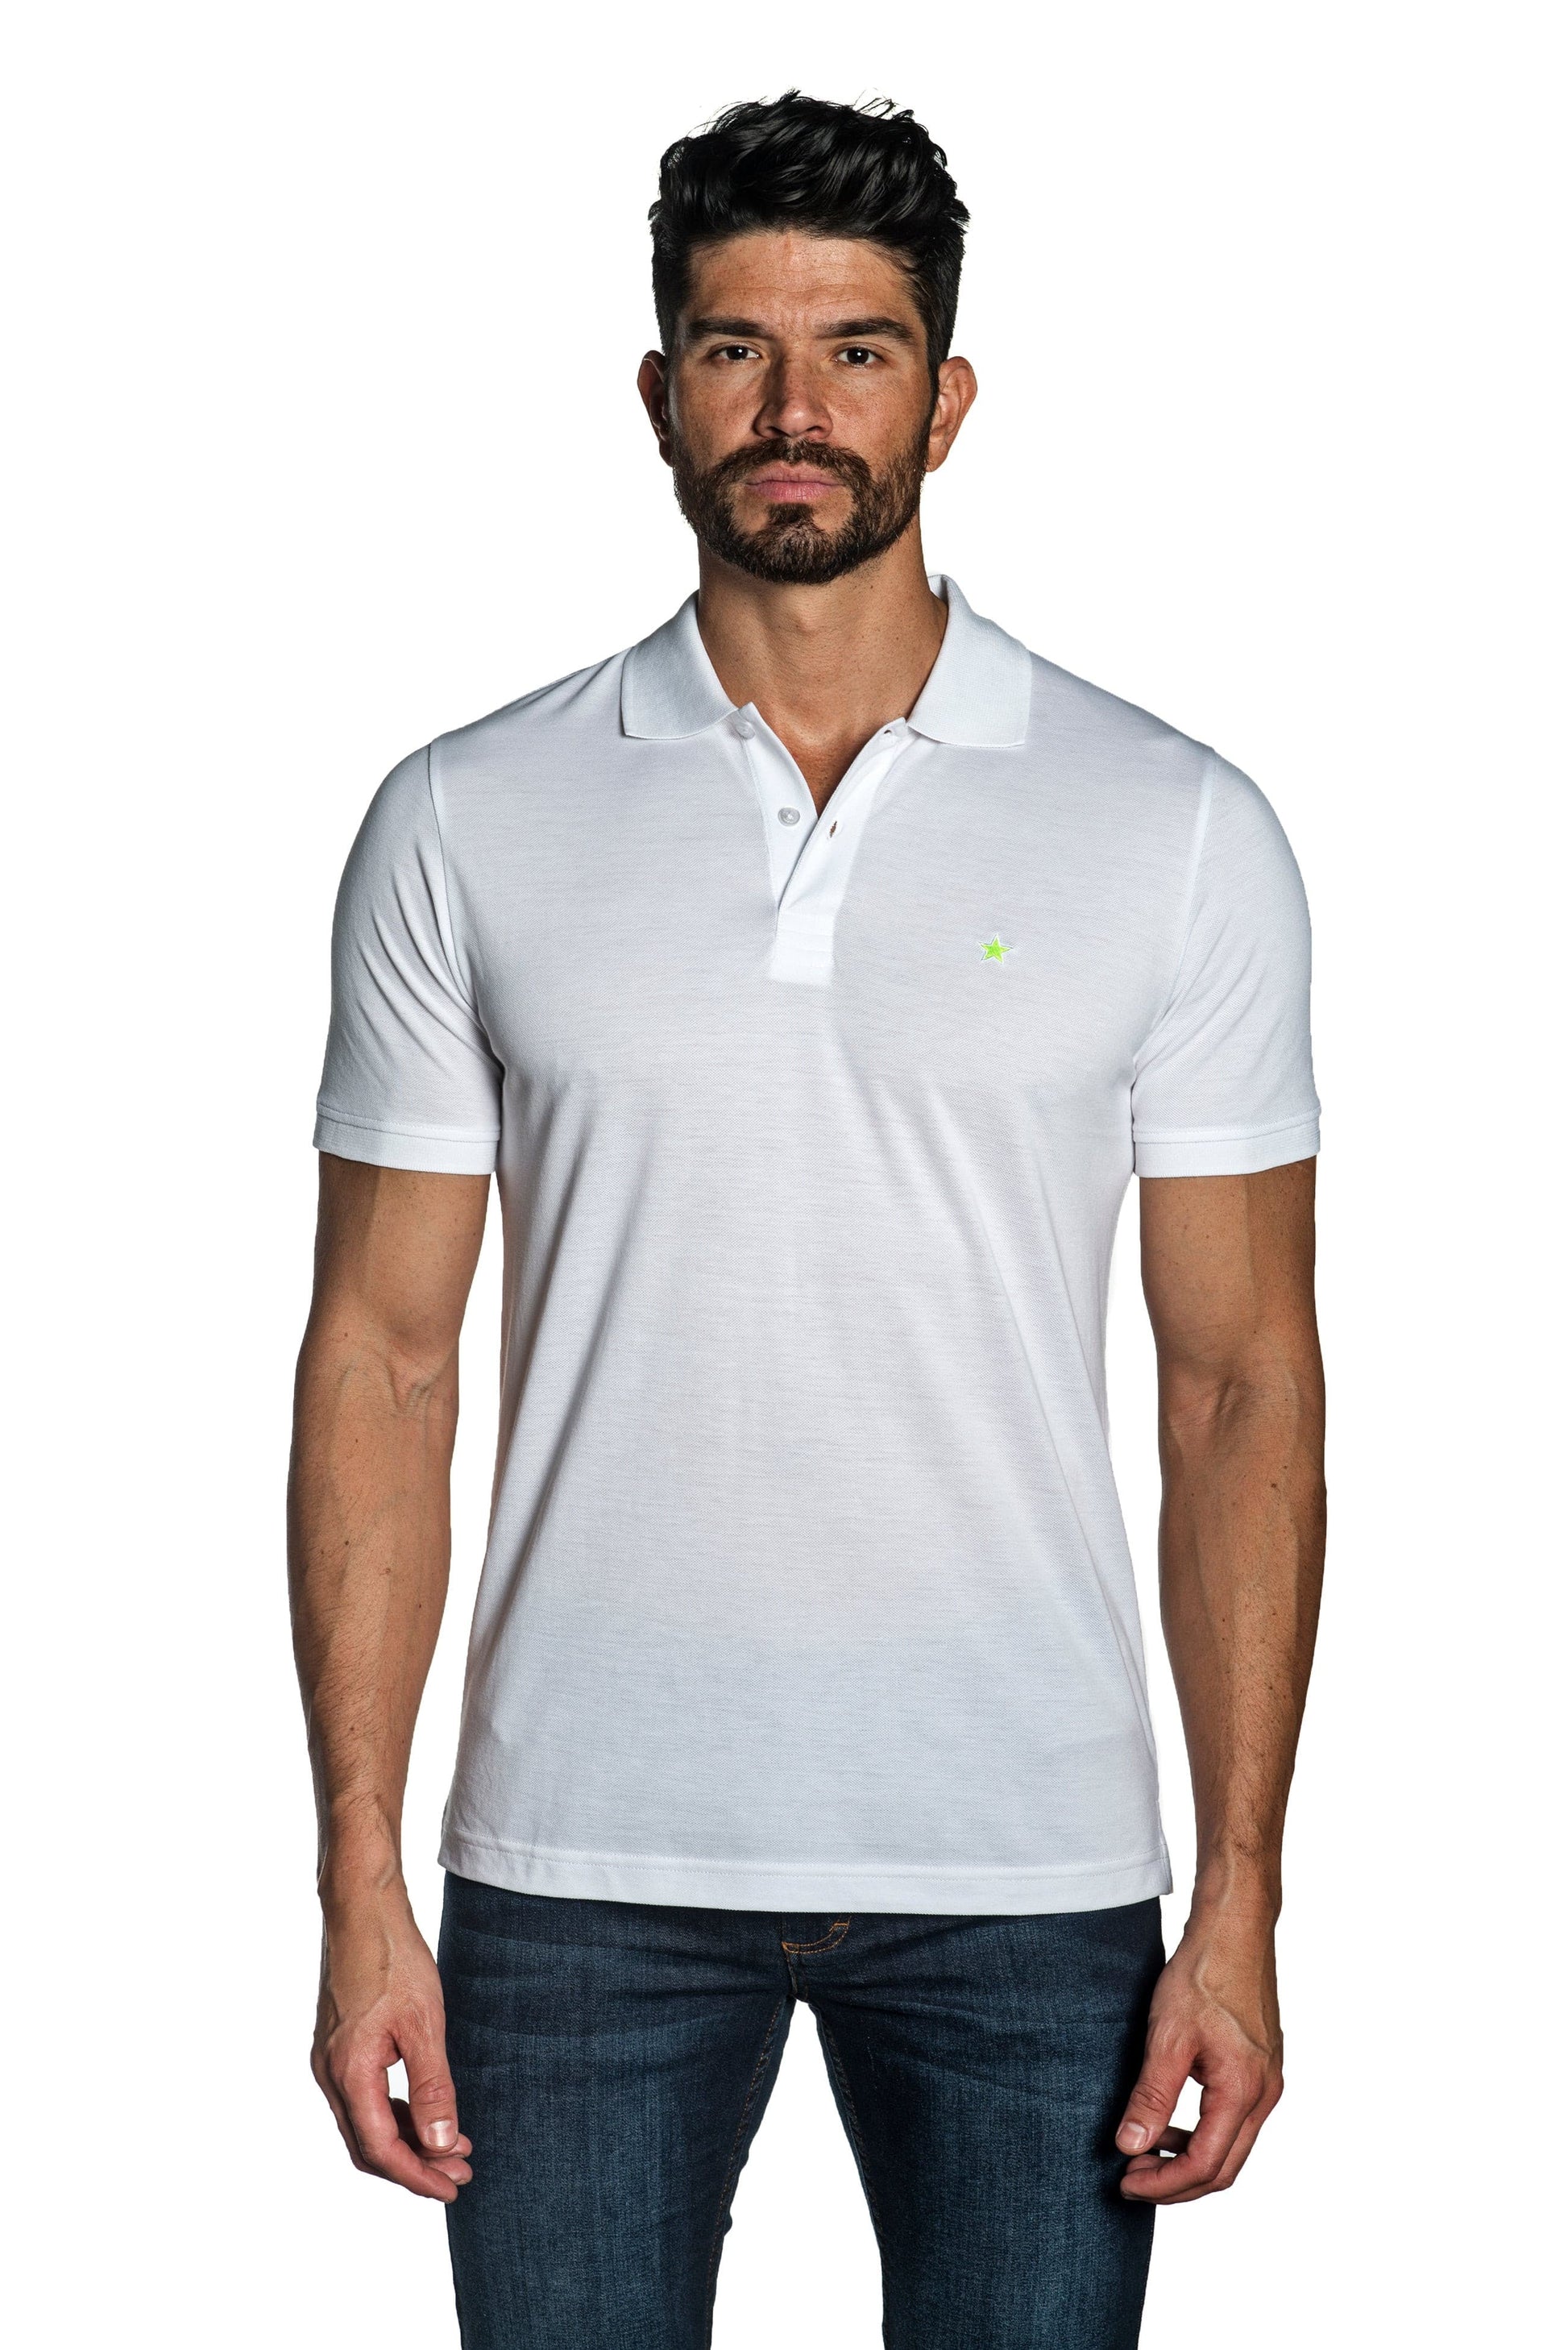 White Mens Polo With Star Embroidery P-27.